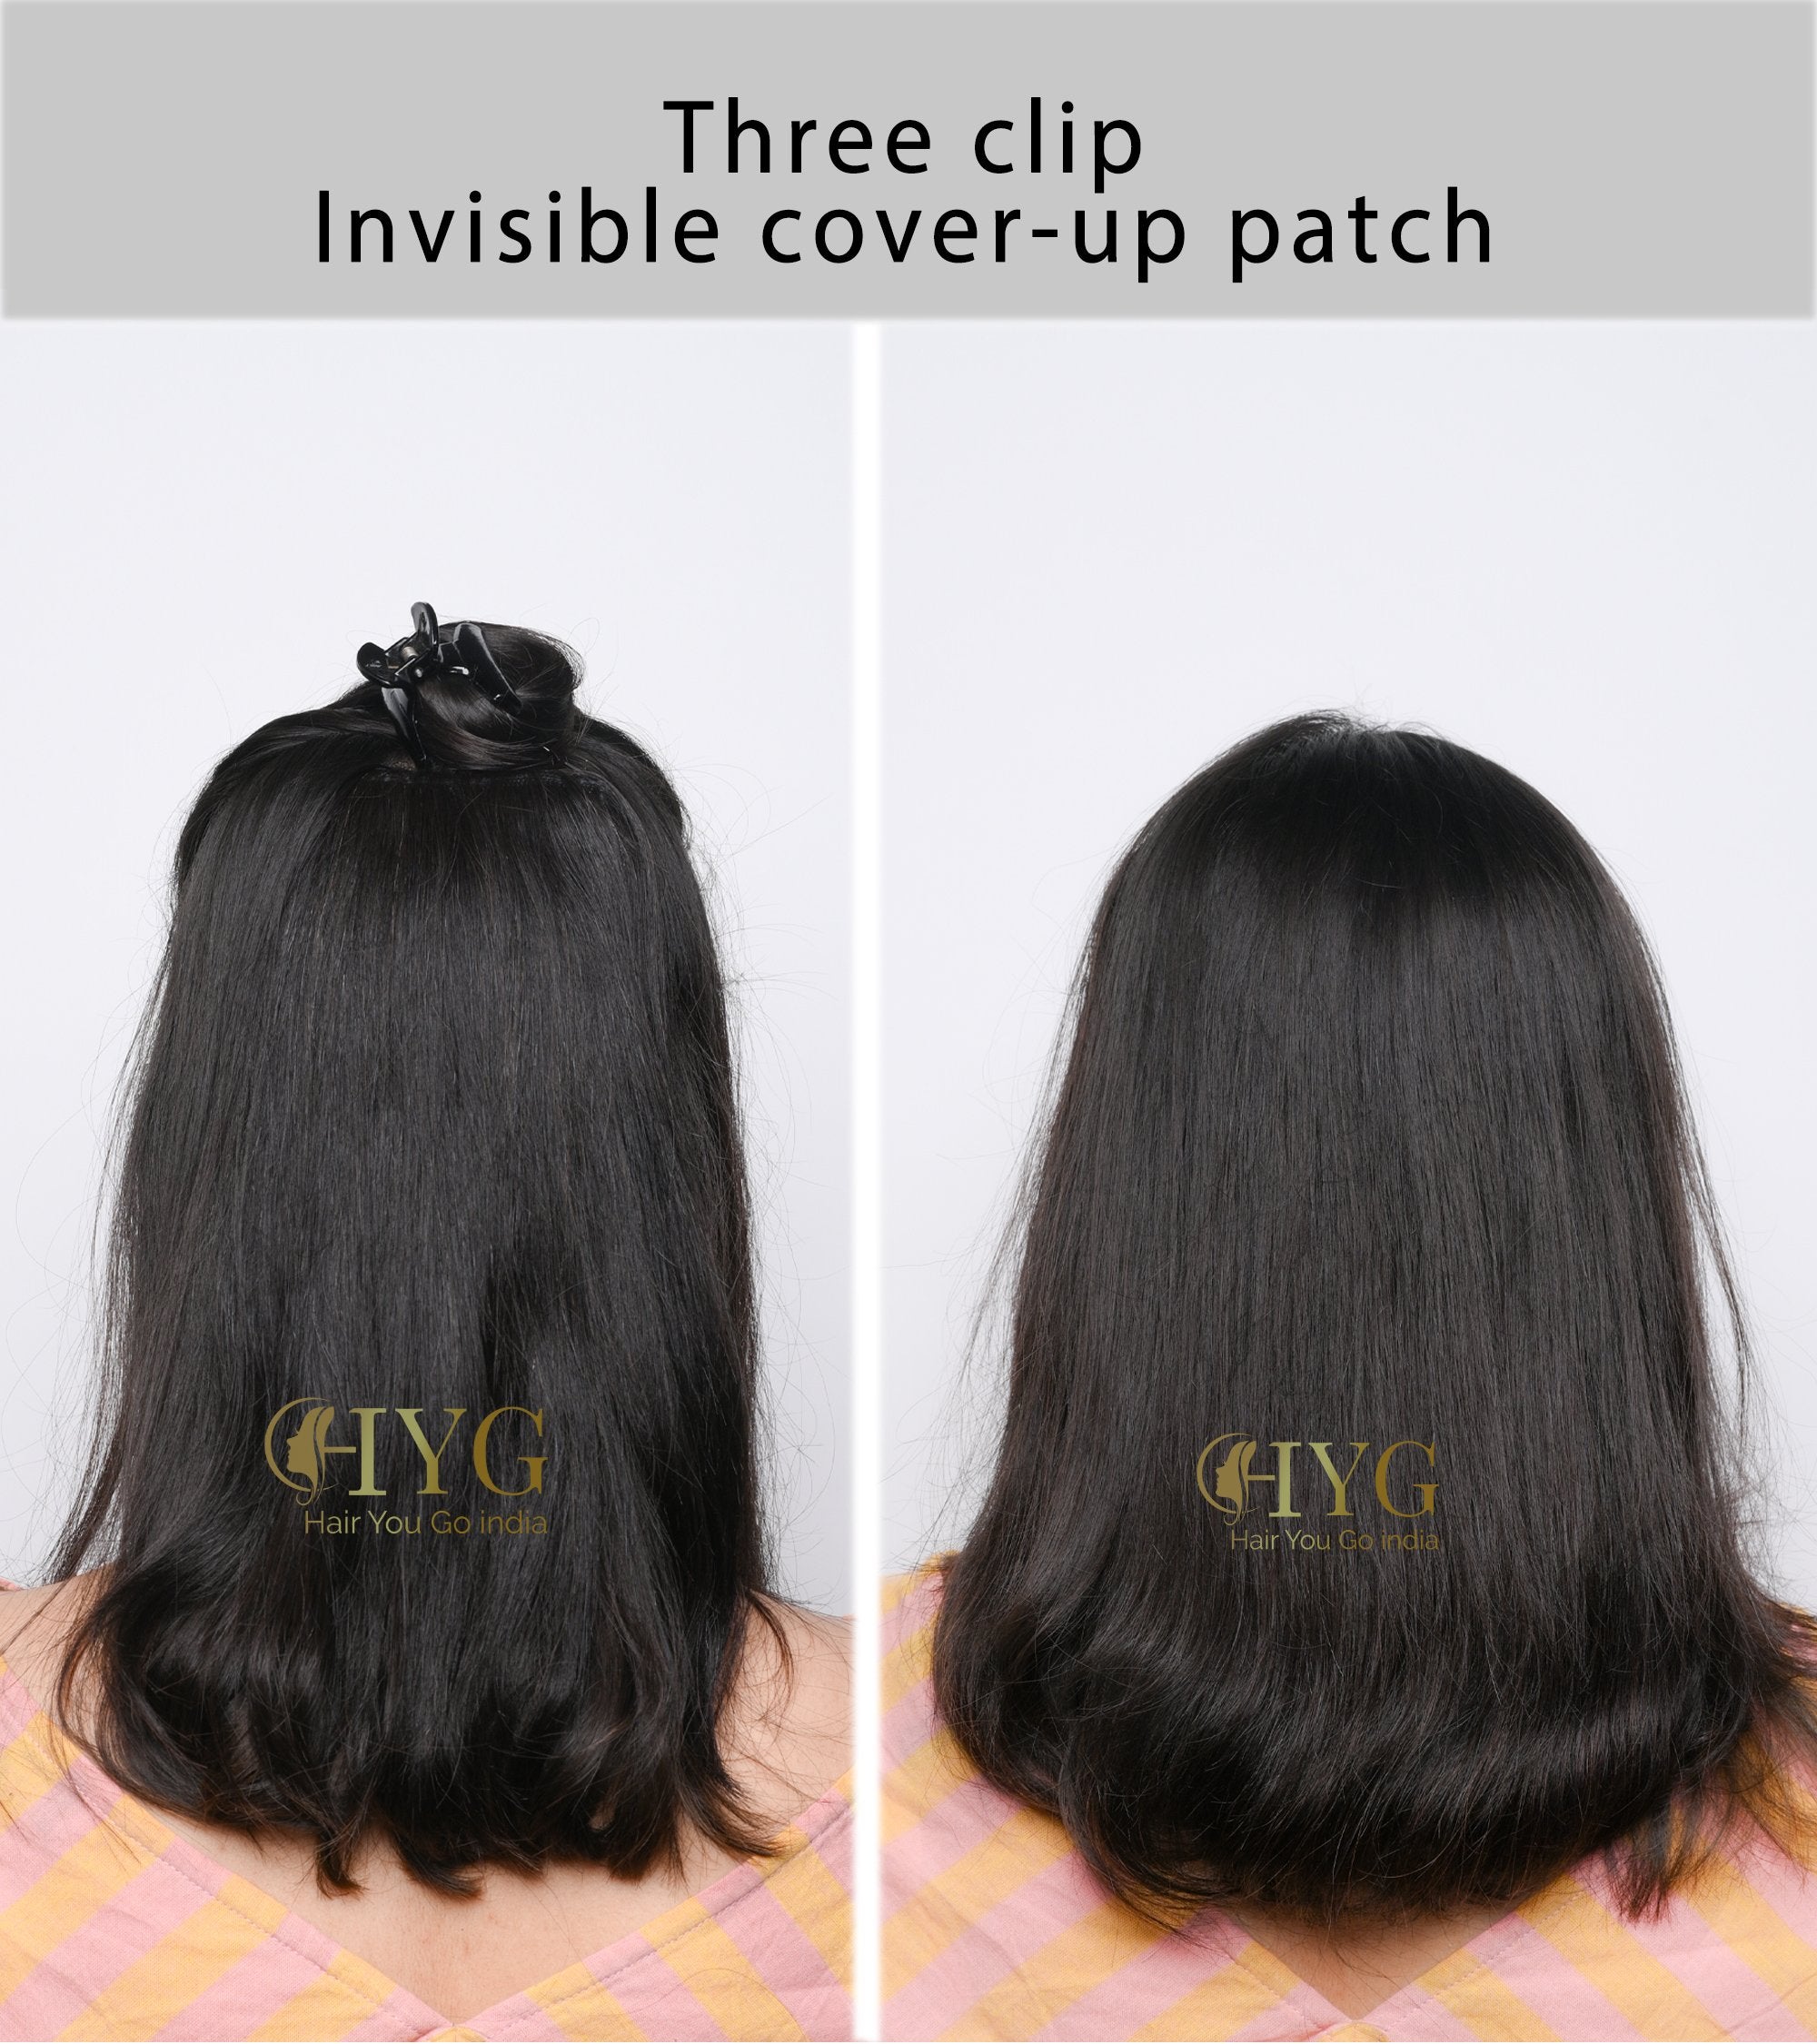 Invisible Cover-Up Patches (Three Clip)